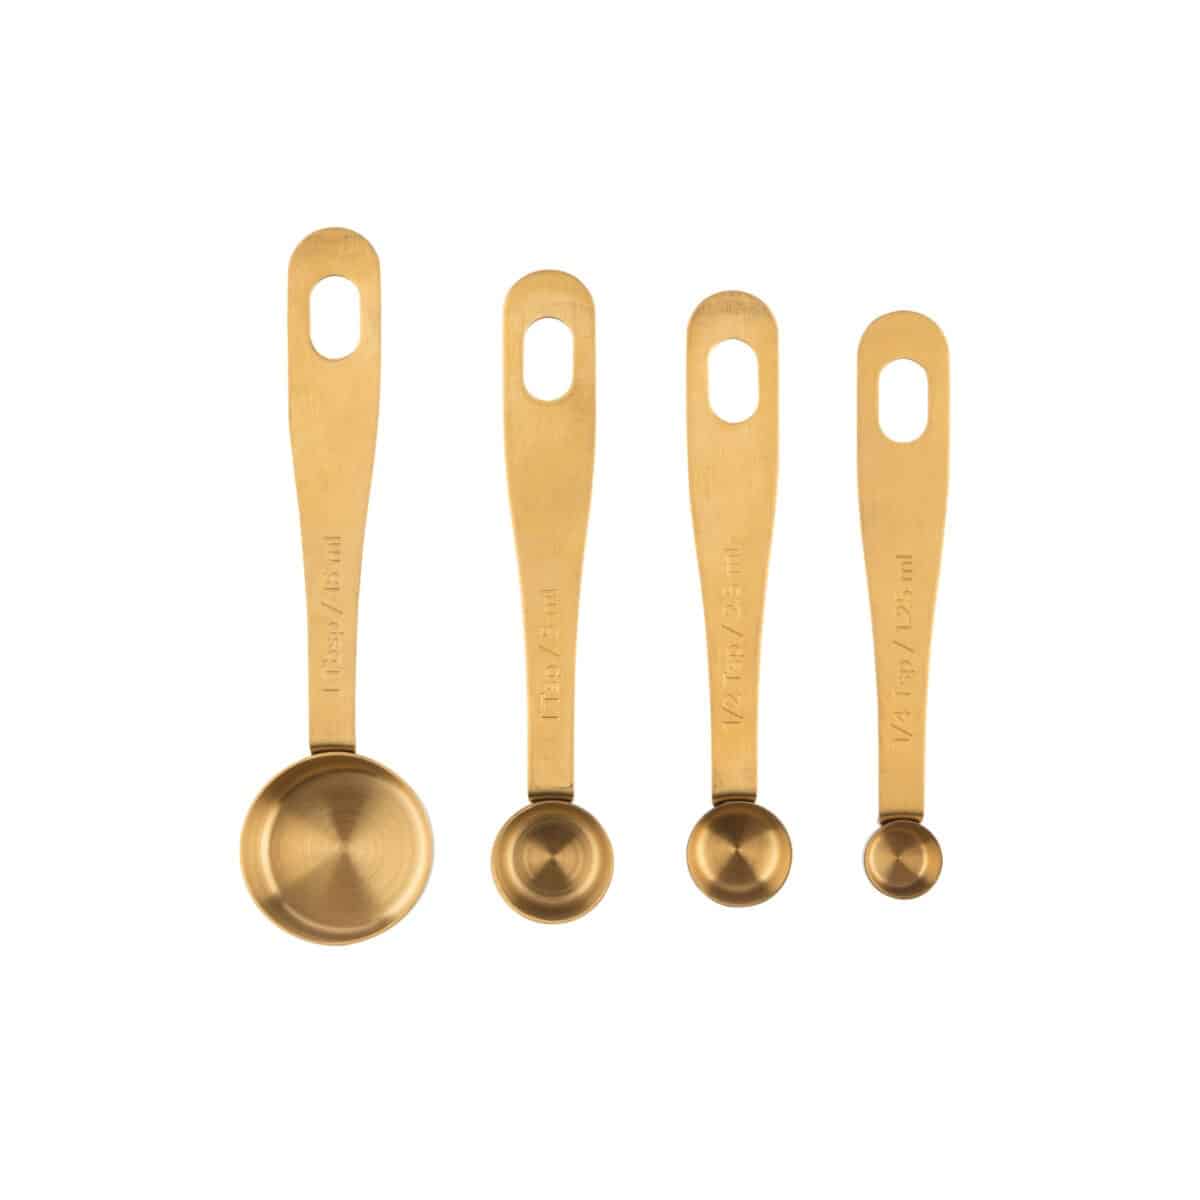 Assorted Brass Measuring Spoons.